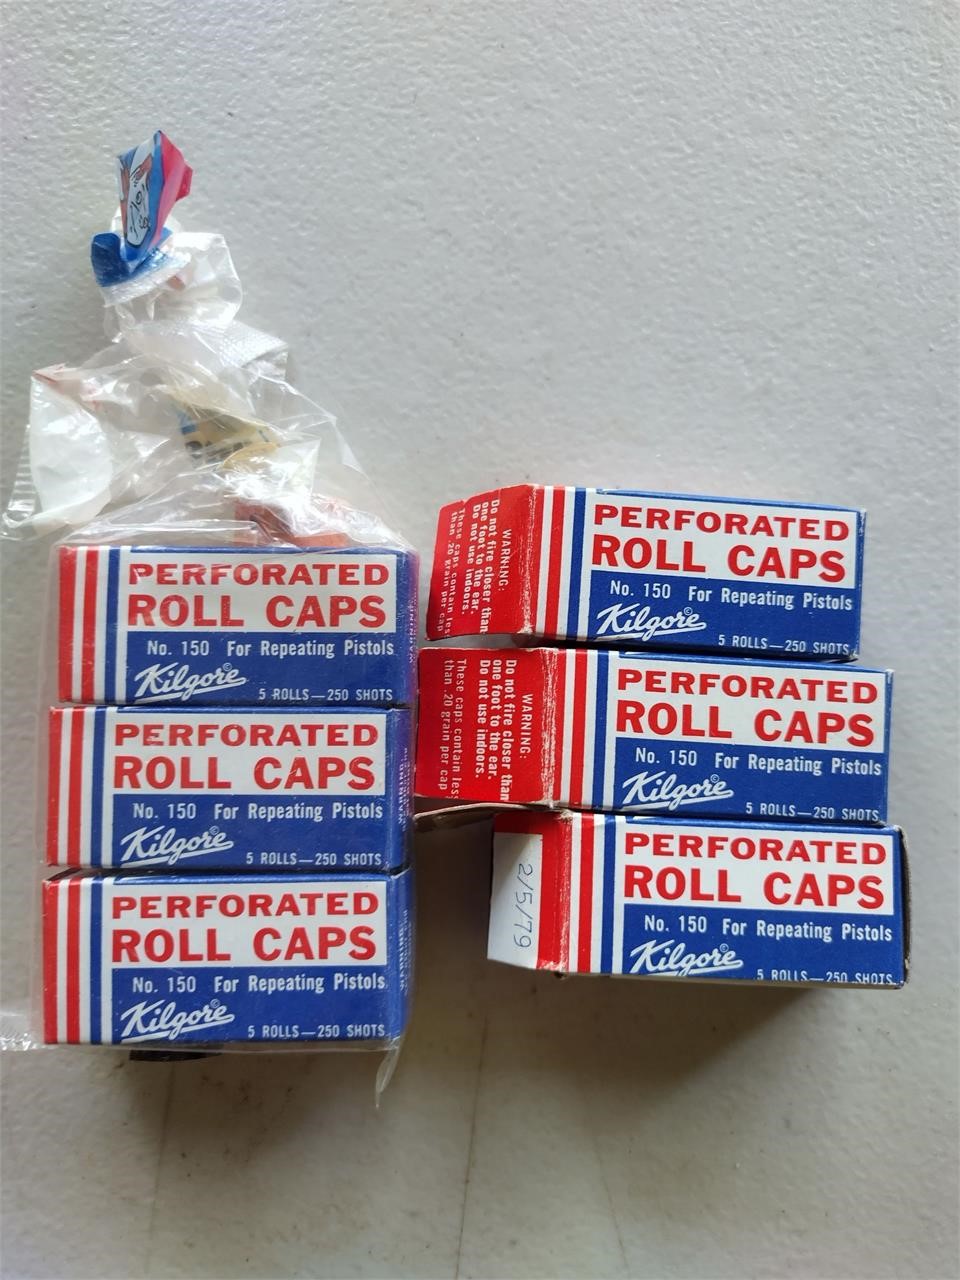 6- Perforated Roll Caps for Repeating Pistols